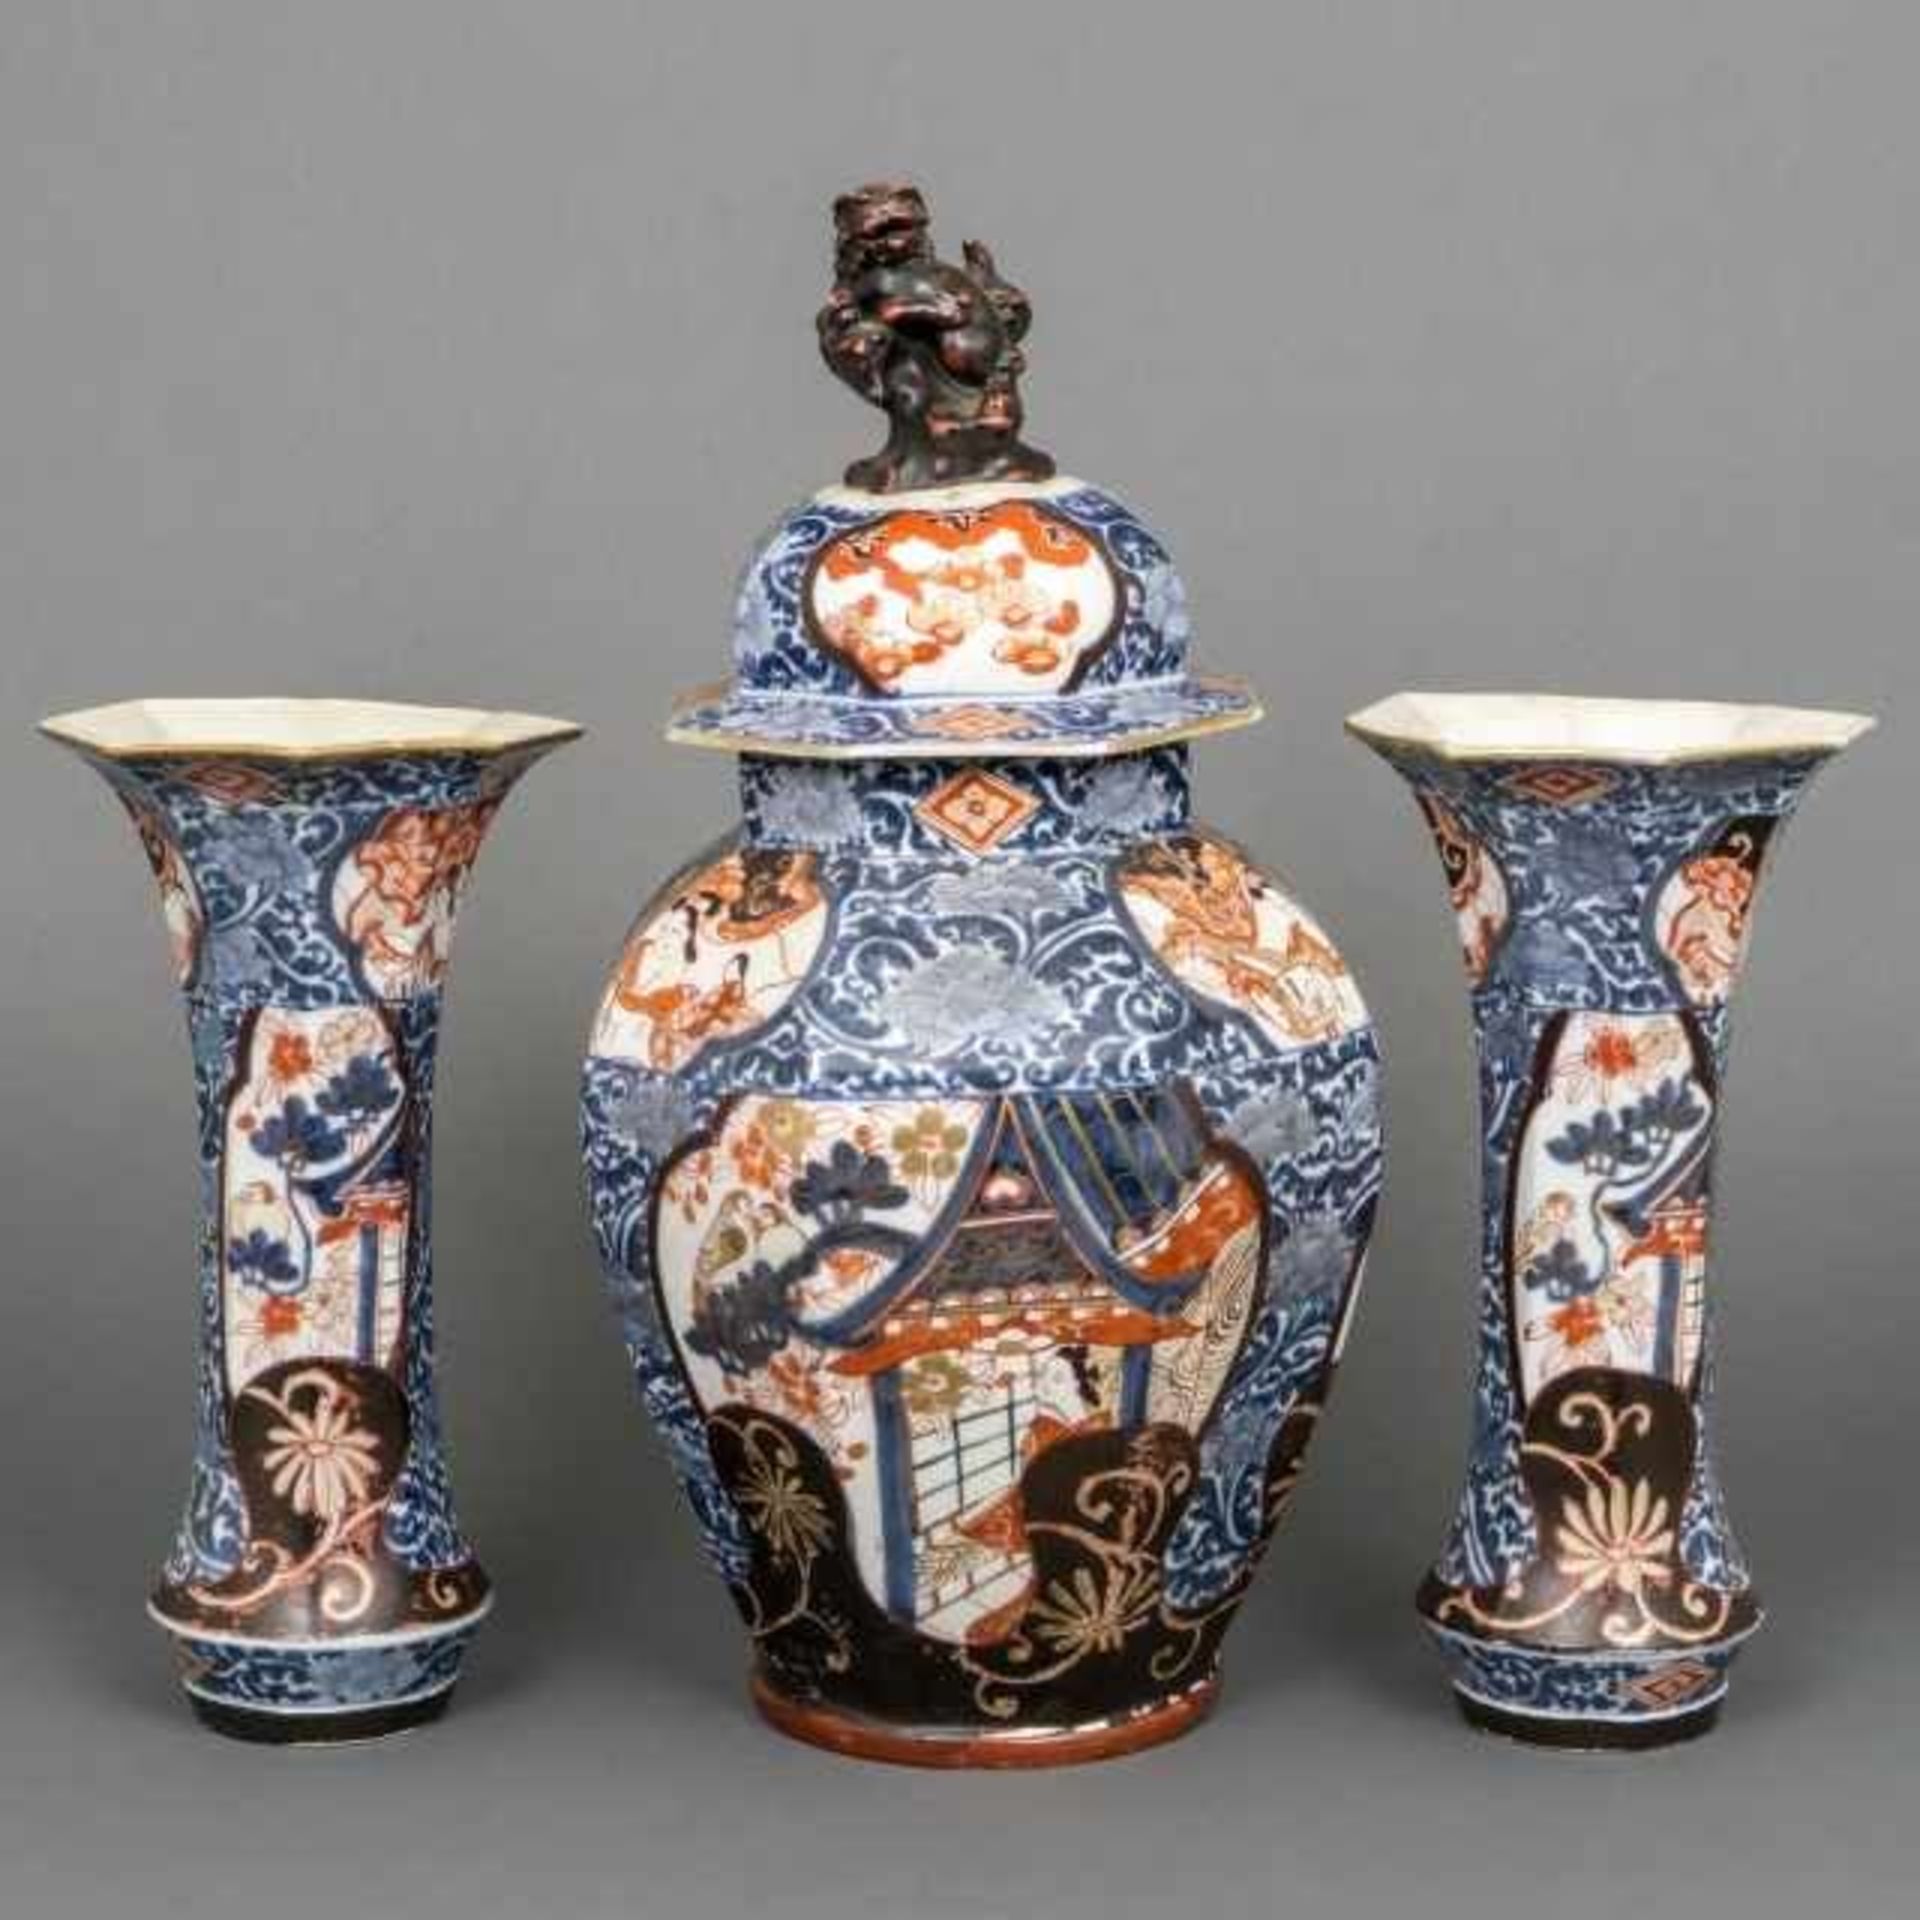 Three-piece porcelain Imari garniture with partial black enamel and decorated with bijin in